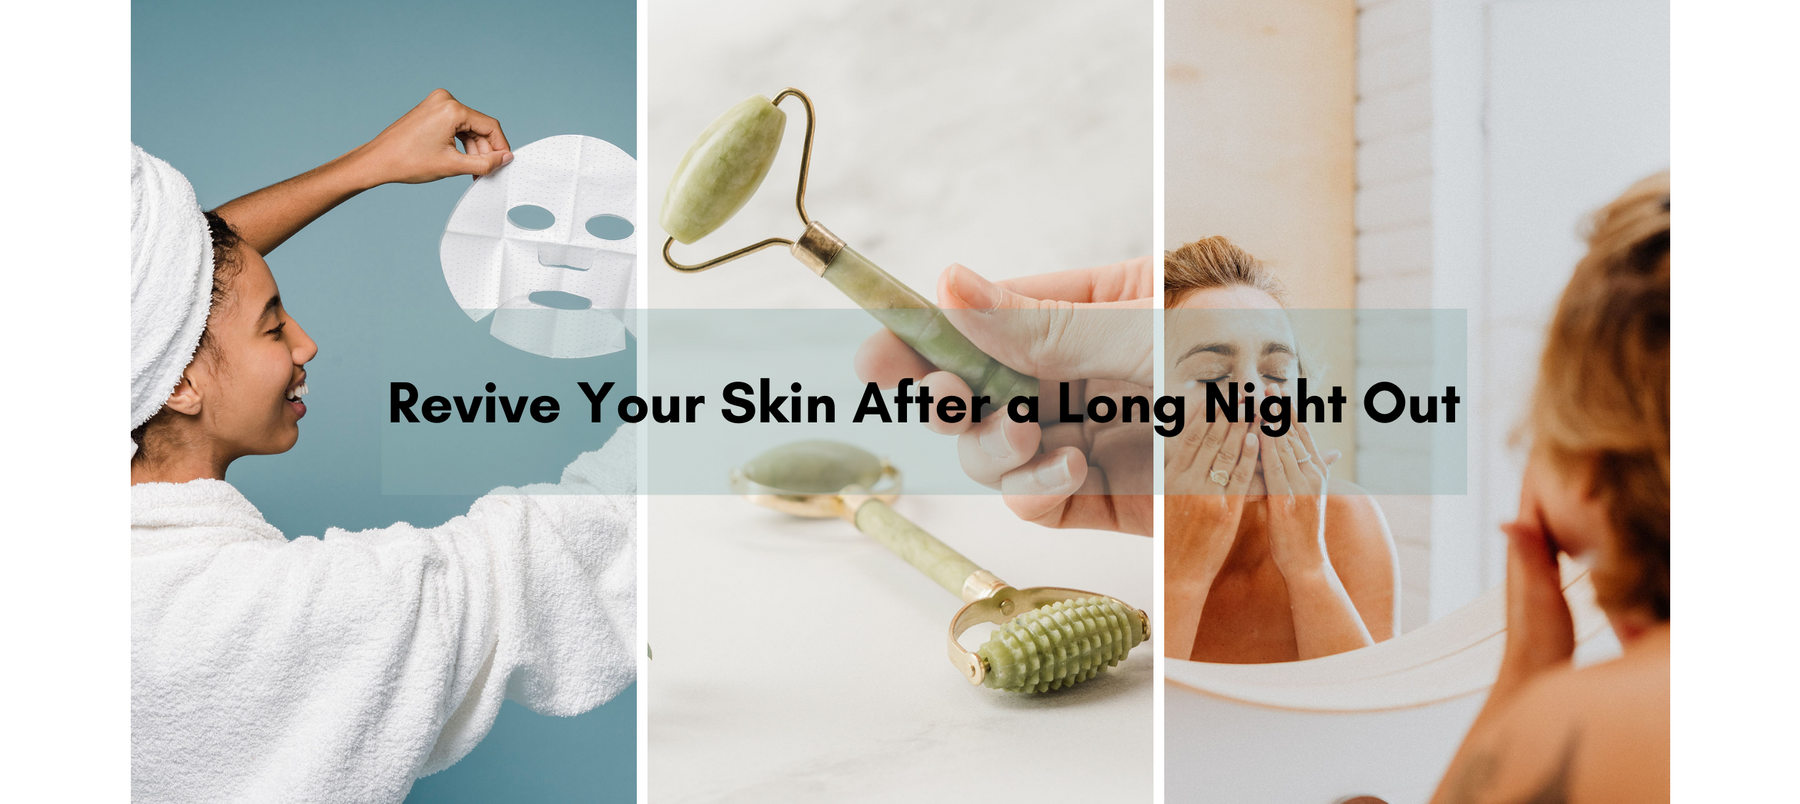 Best Ways to Cure Your Skin After a Long Night Out